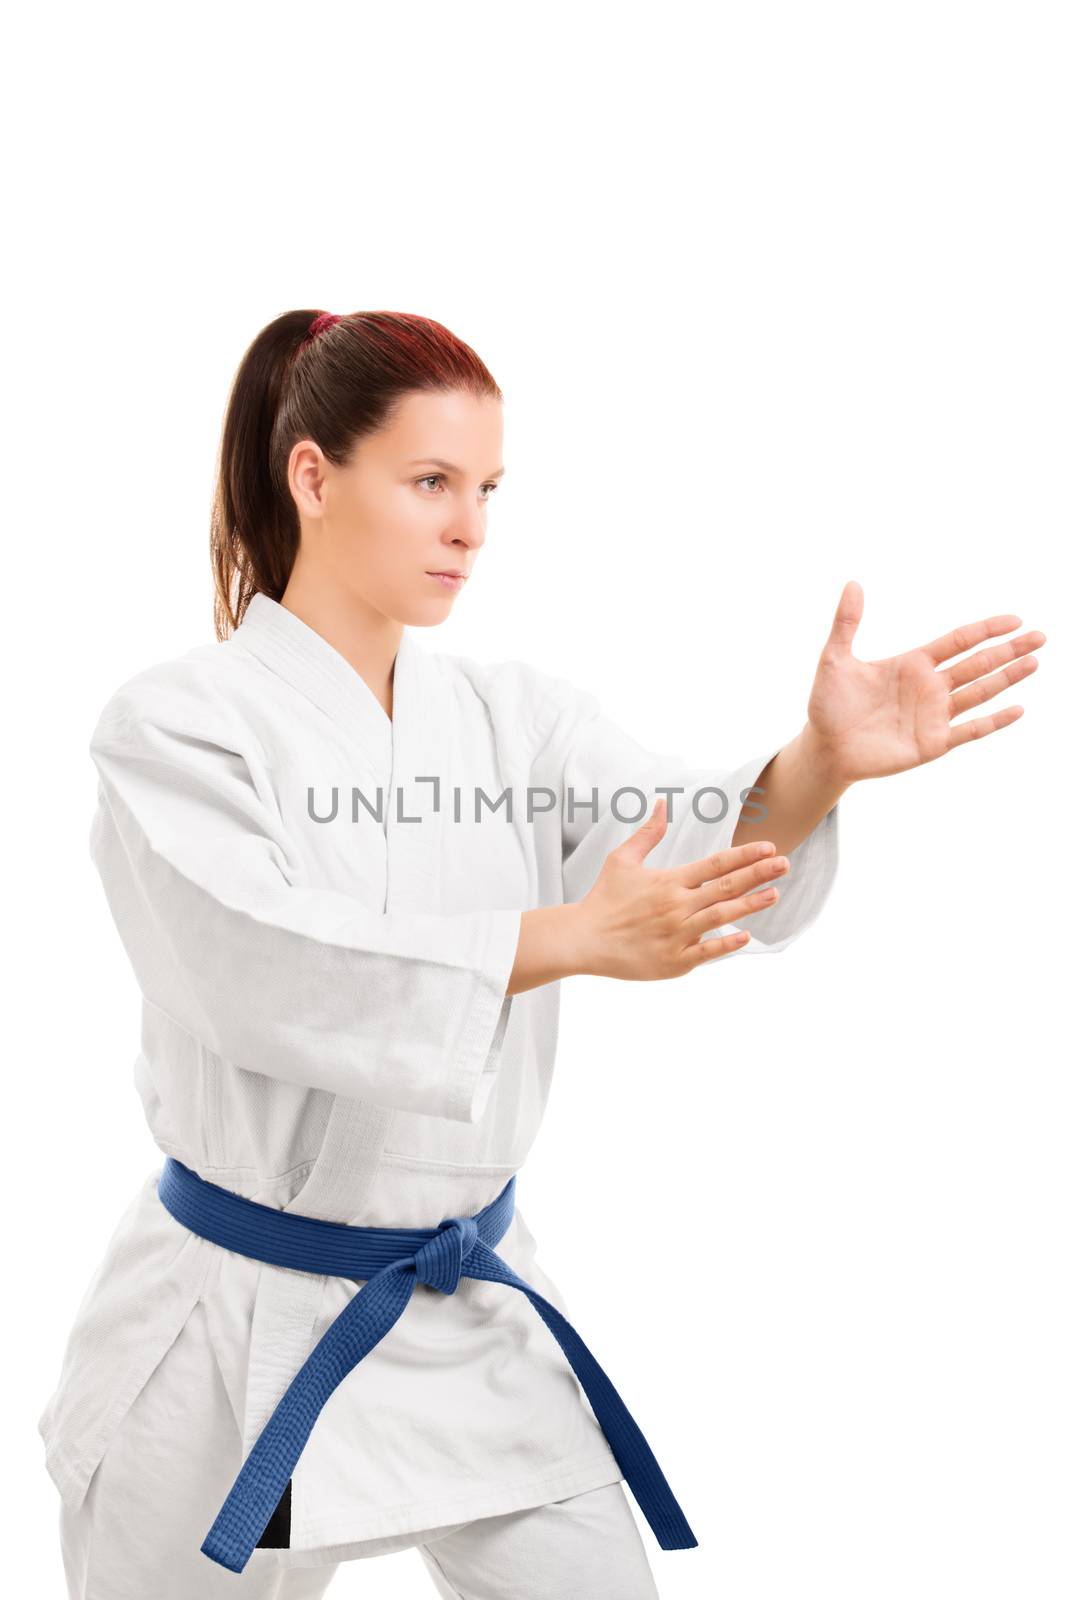 A portrait of a young girl in a kimono with blue belt in a fighting stance, isolated on white background.